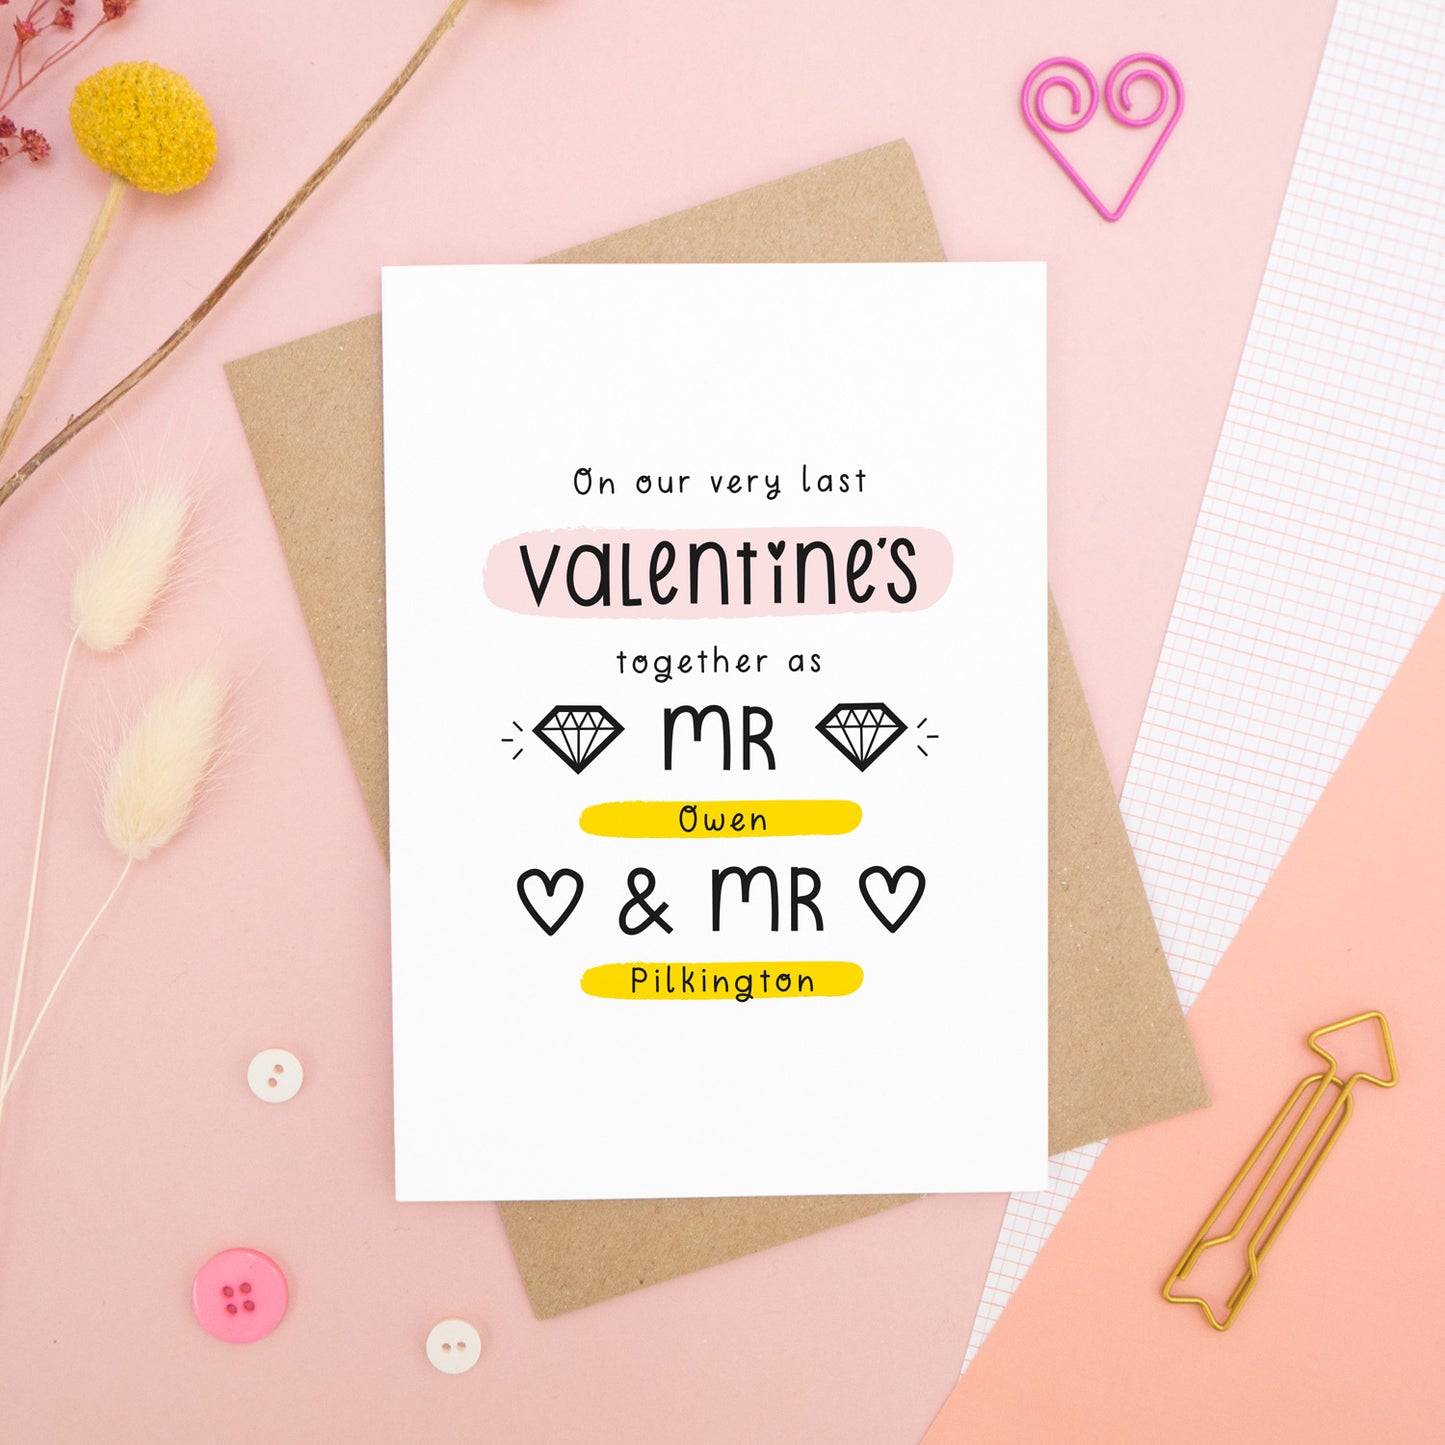 A personalised last anniversary or Valentine’s card photographed on a pink background with floral props, paper clips, and buttons. This image shows the last valentine’s option with the Mr & Mr wording. The text is black and there are pops of yellow and pink behind key words.